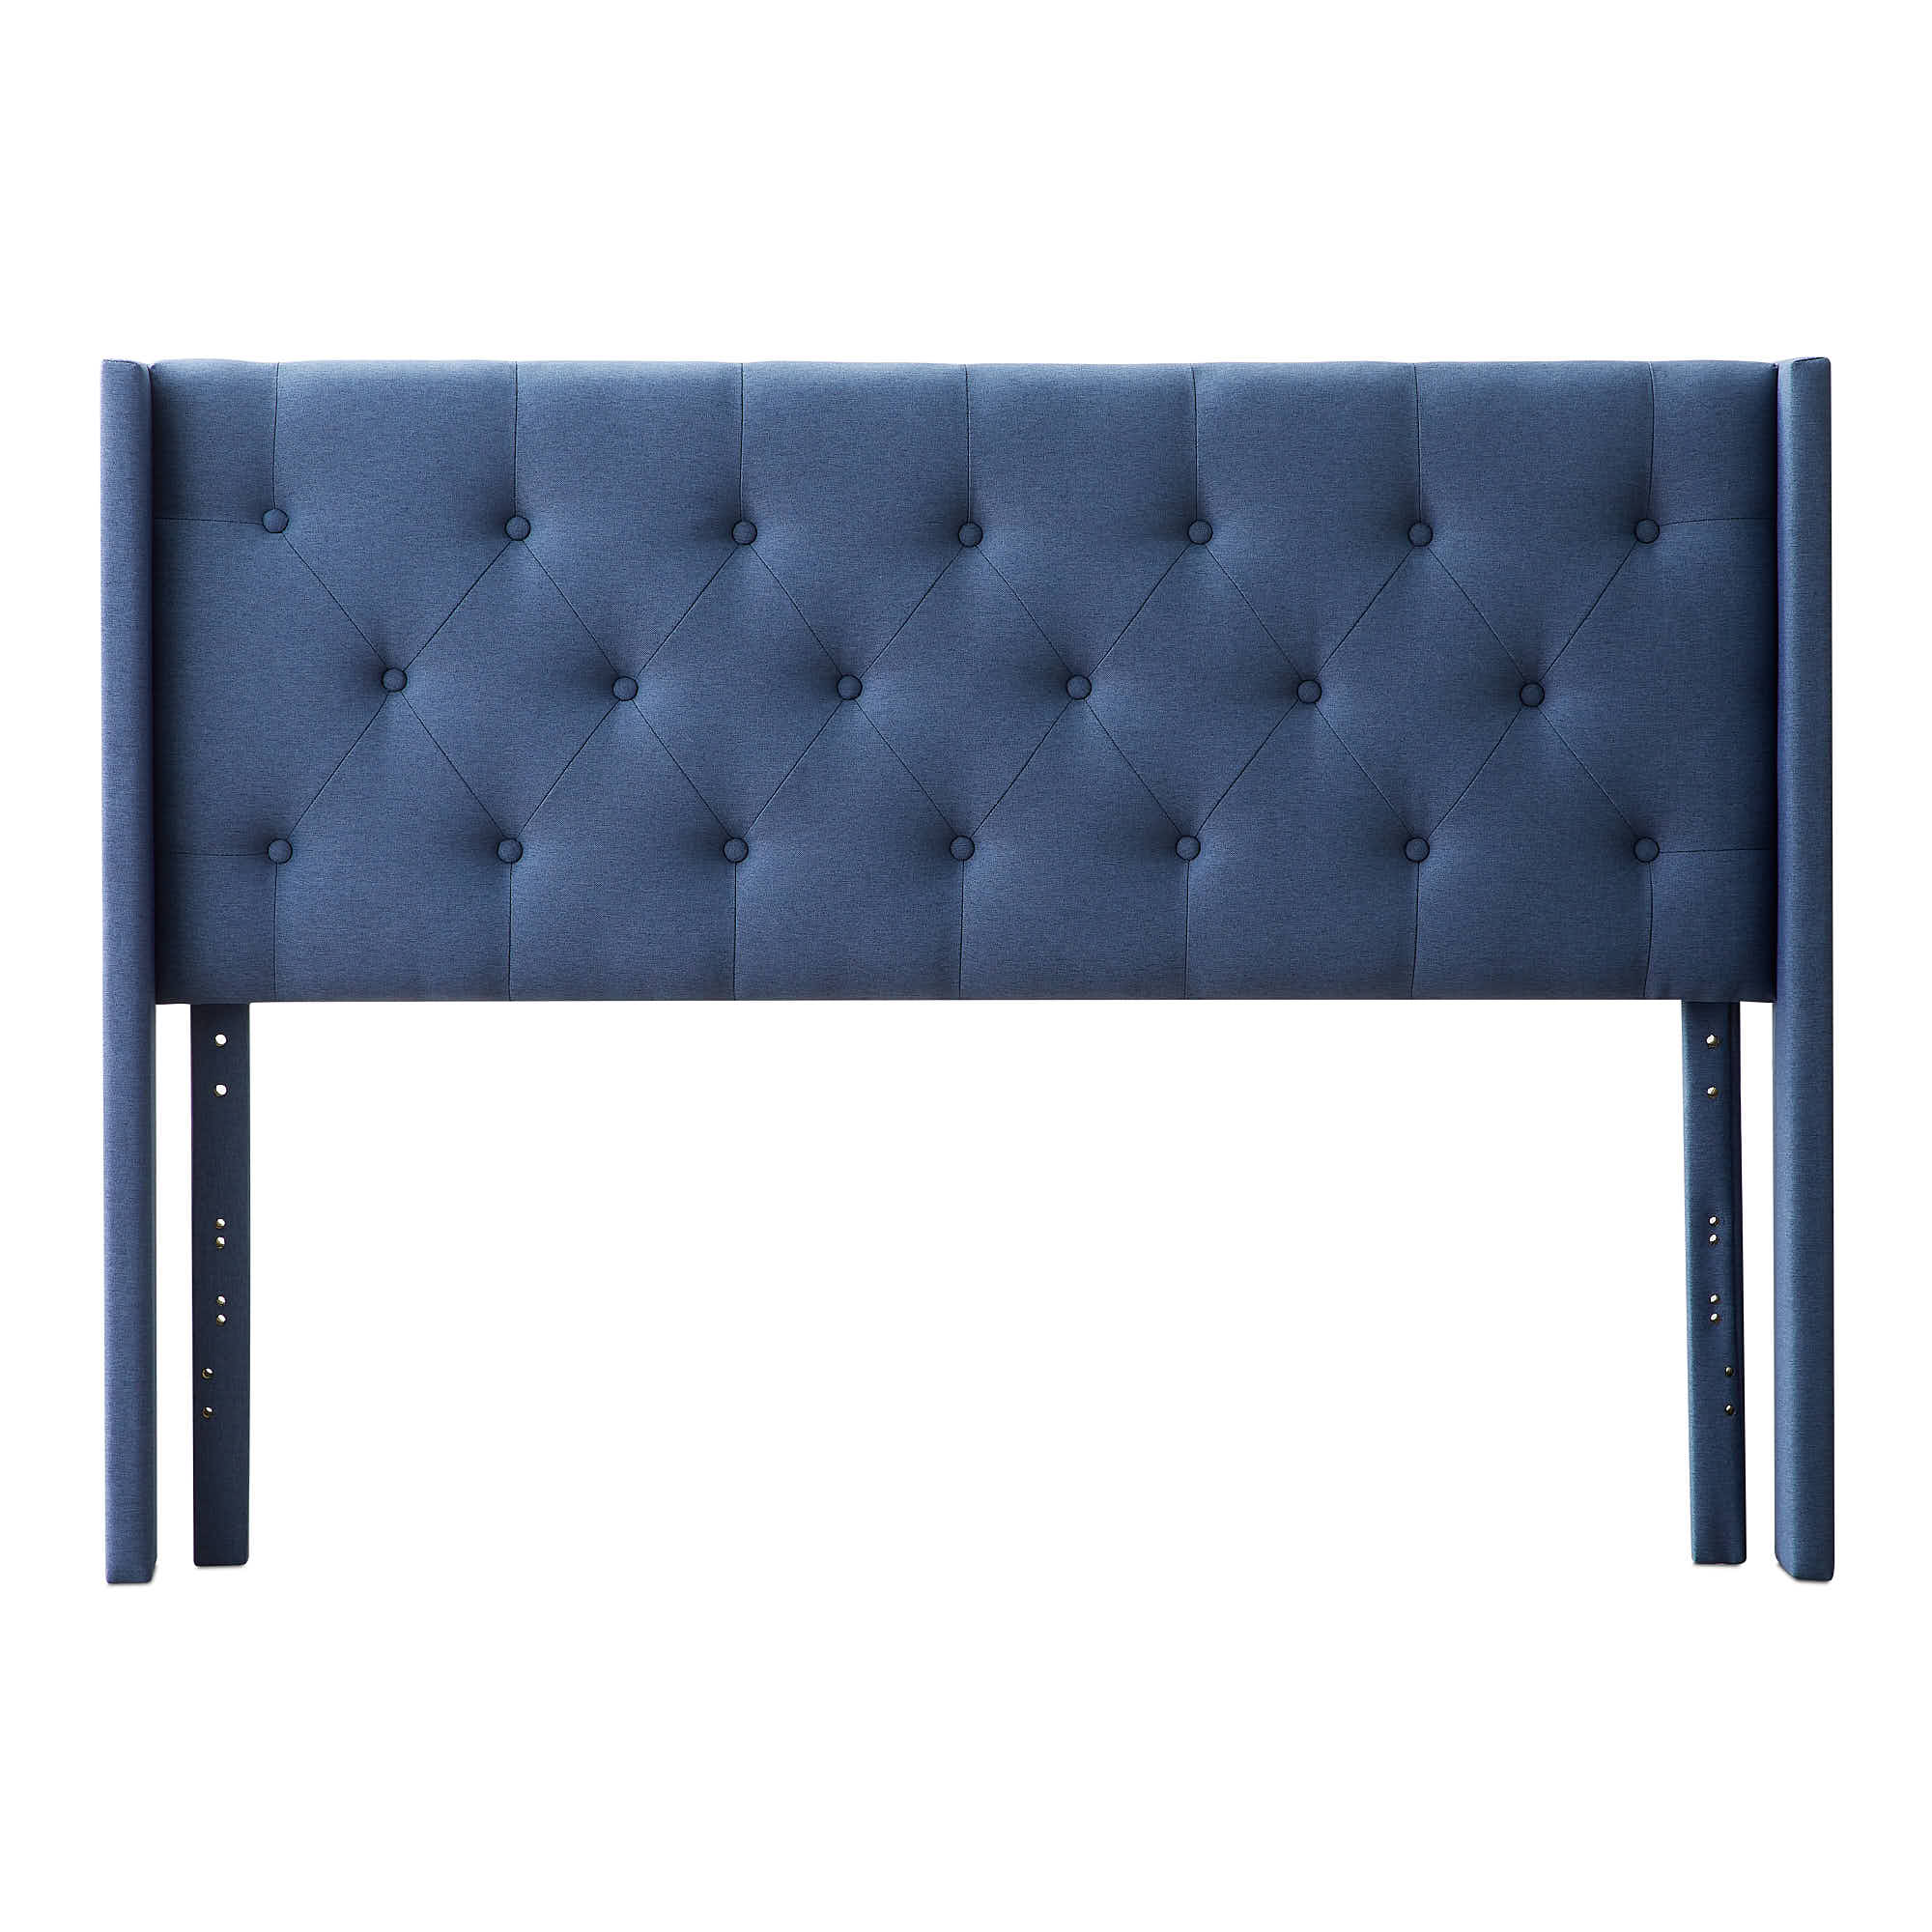 Rest Haven Button Tufted Upholstered Headboard, Queen, Navy - image 4 of 9